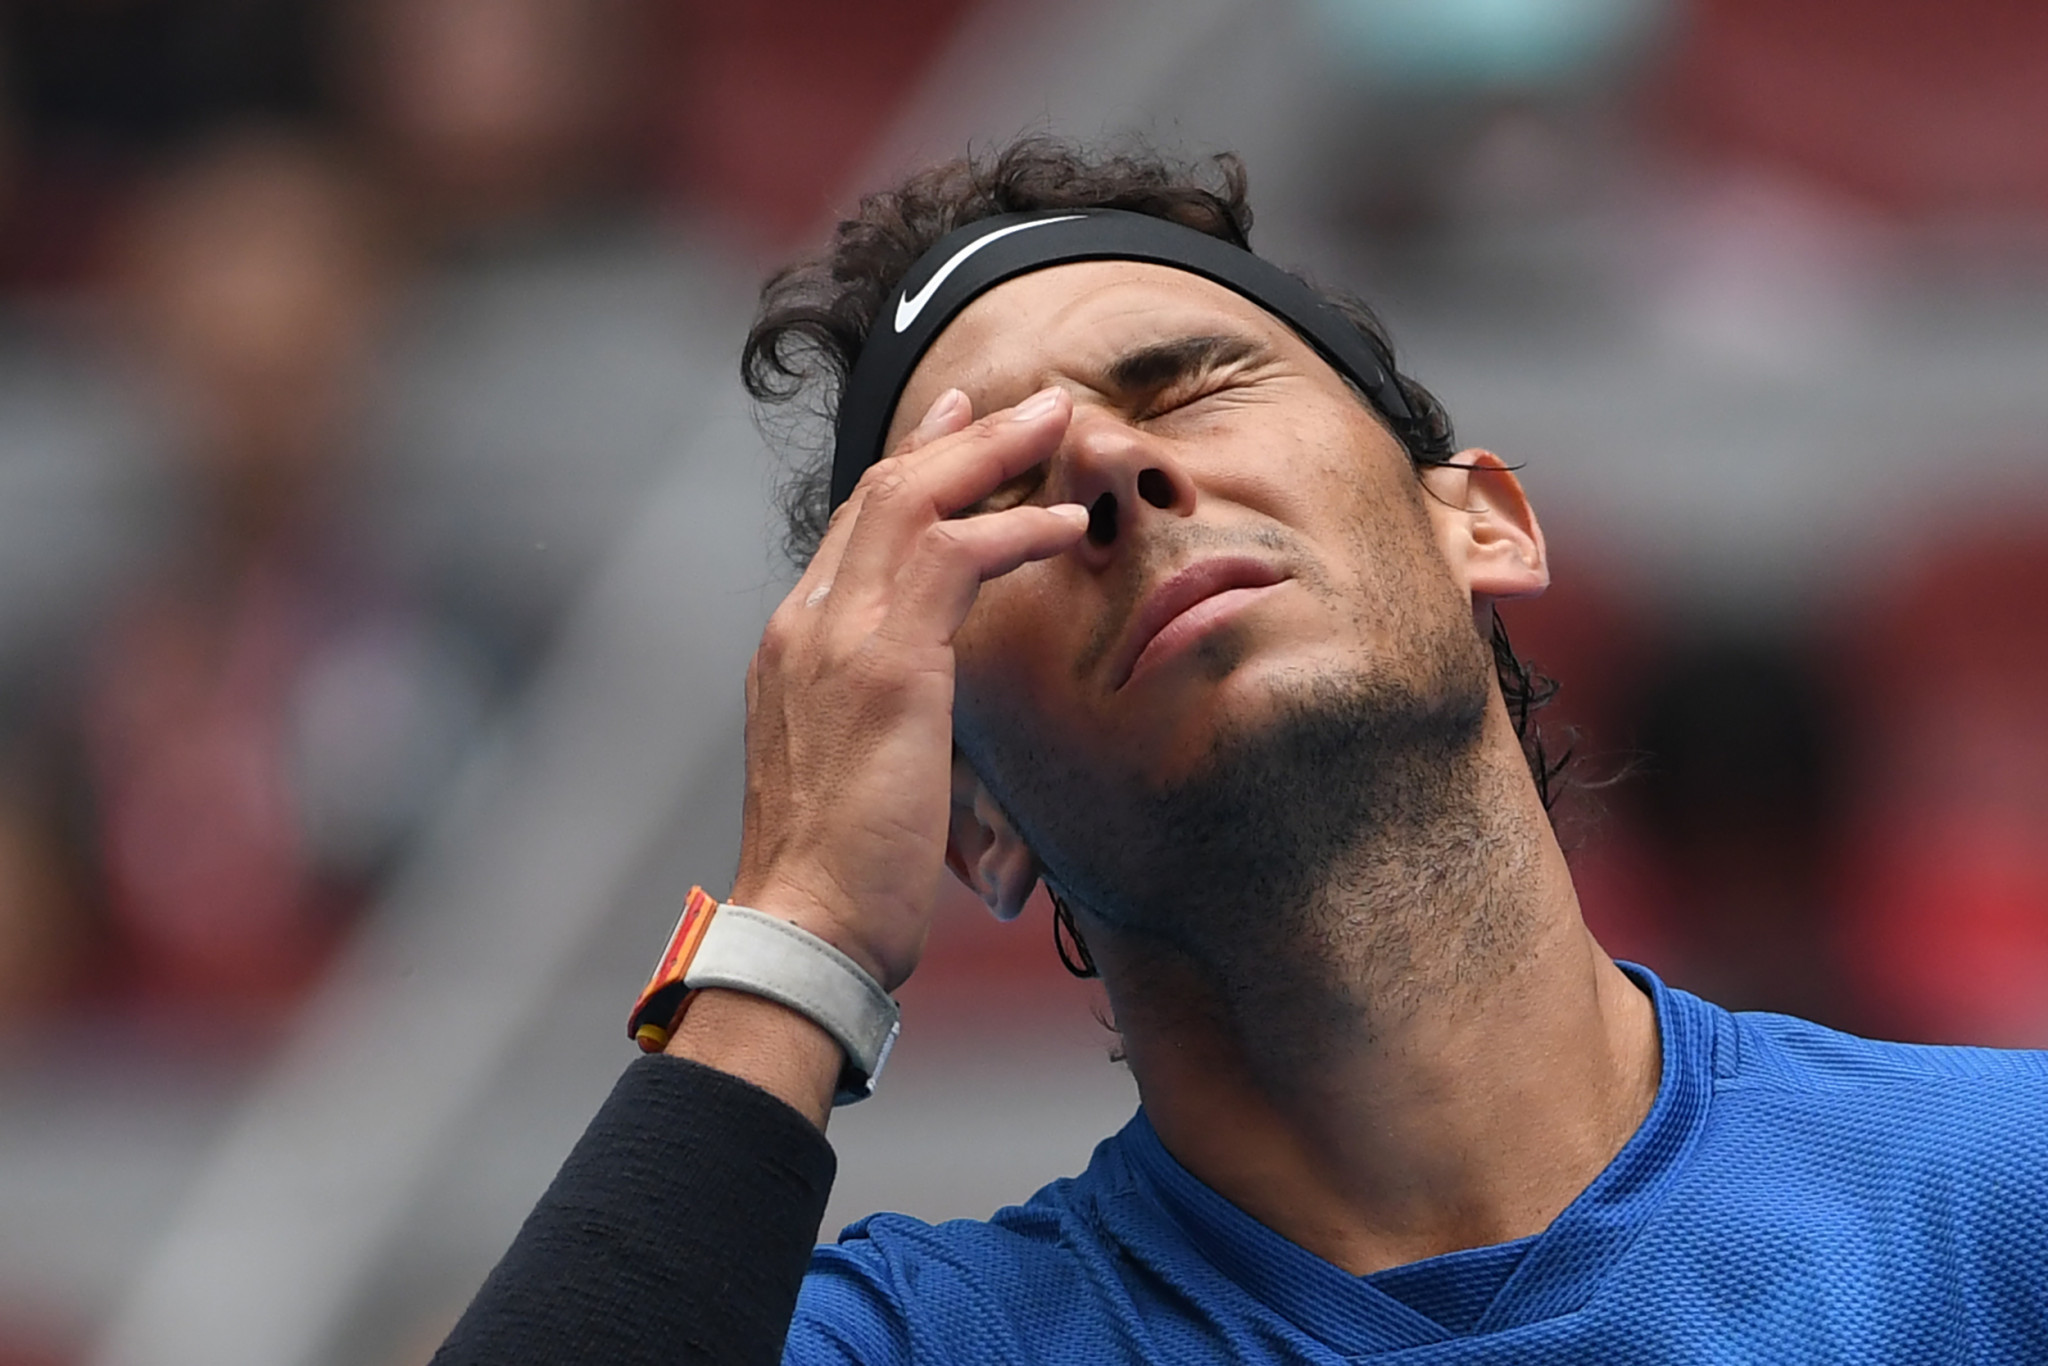 Nadal overcomes eye injury to earn place in China Open semi-finals